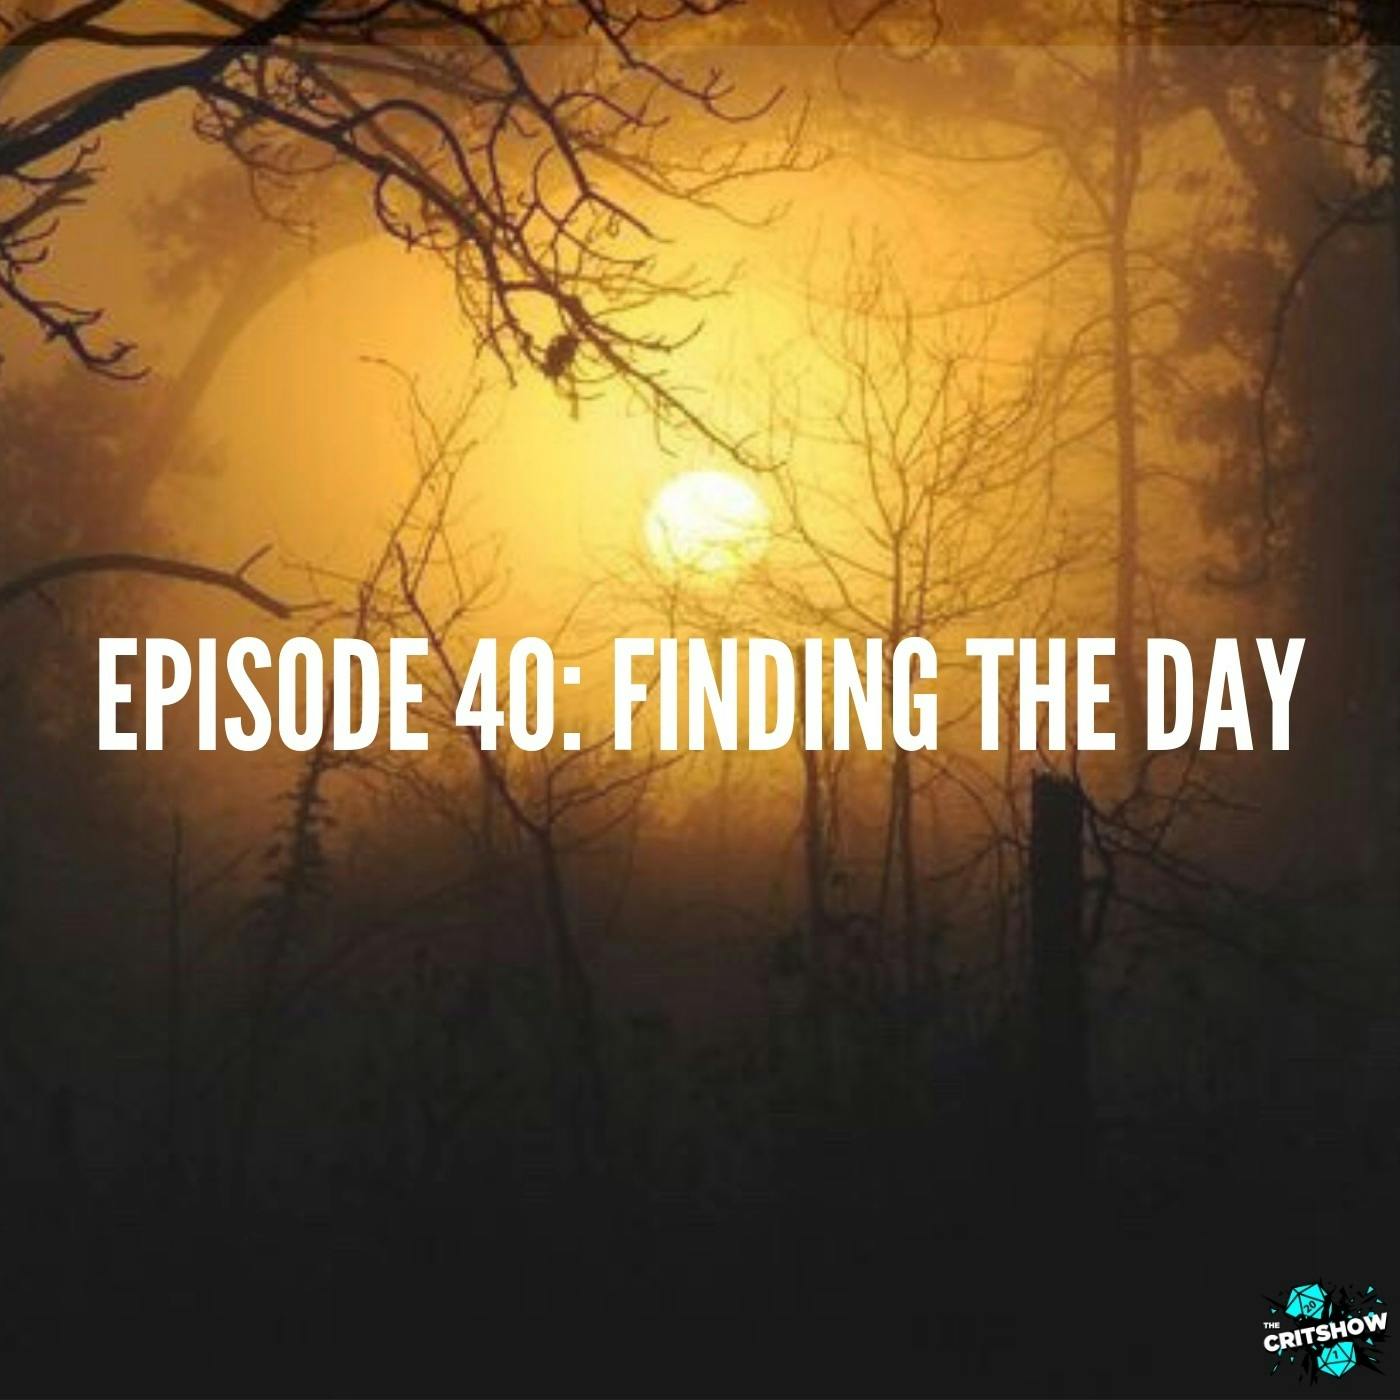 Finding the Day (S1, E40)